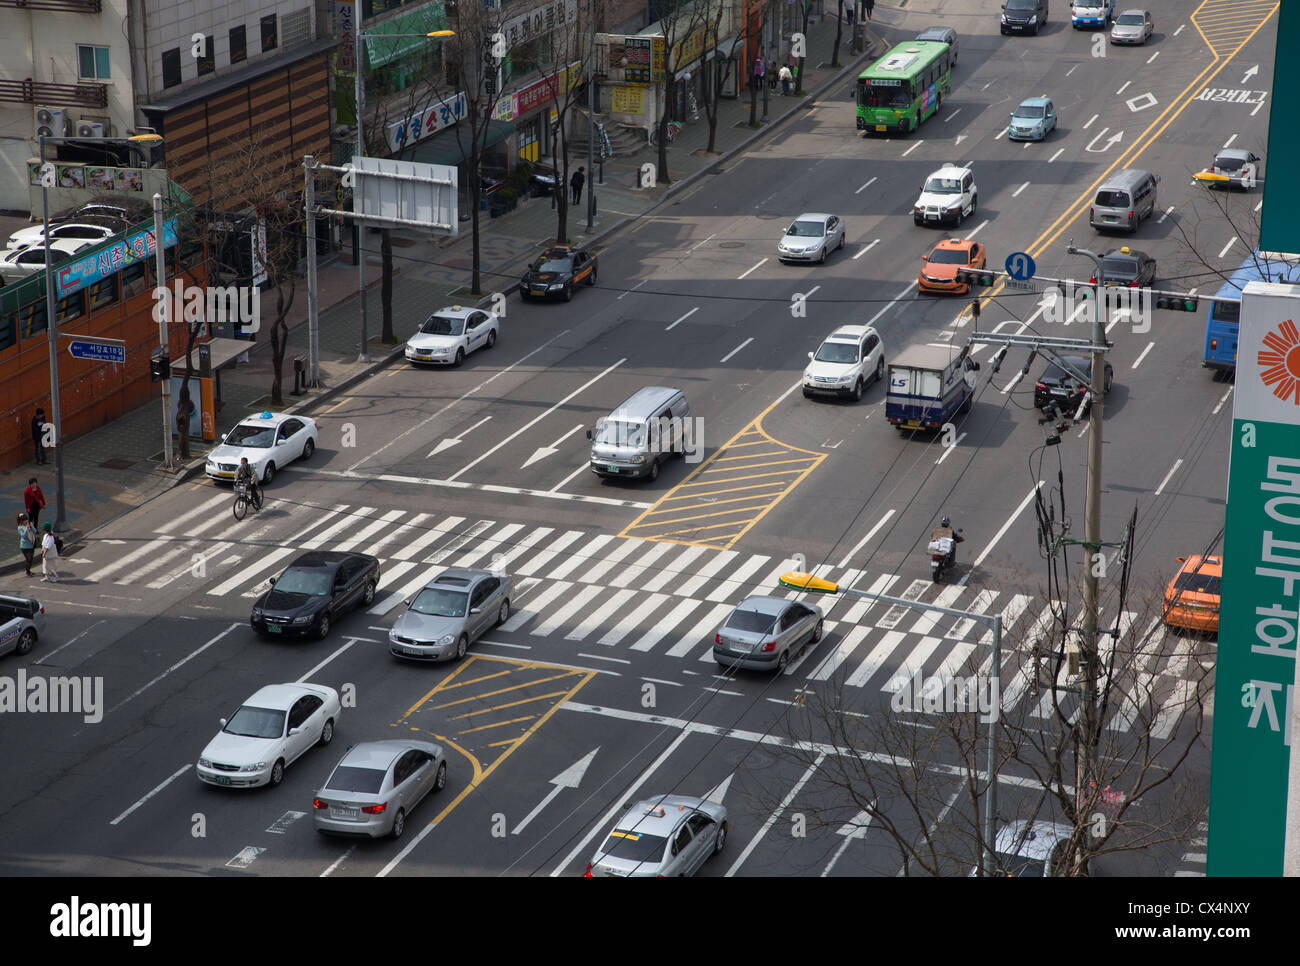 A typical street scene at a pedestrian crosswalk on a busy street in Seoul, South Korea Stock Photo